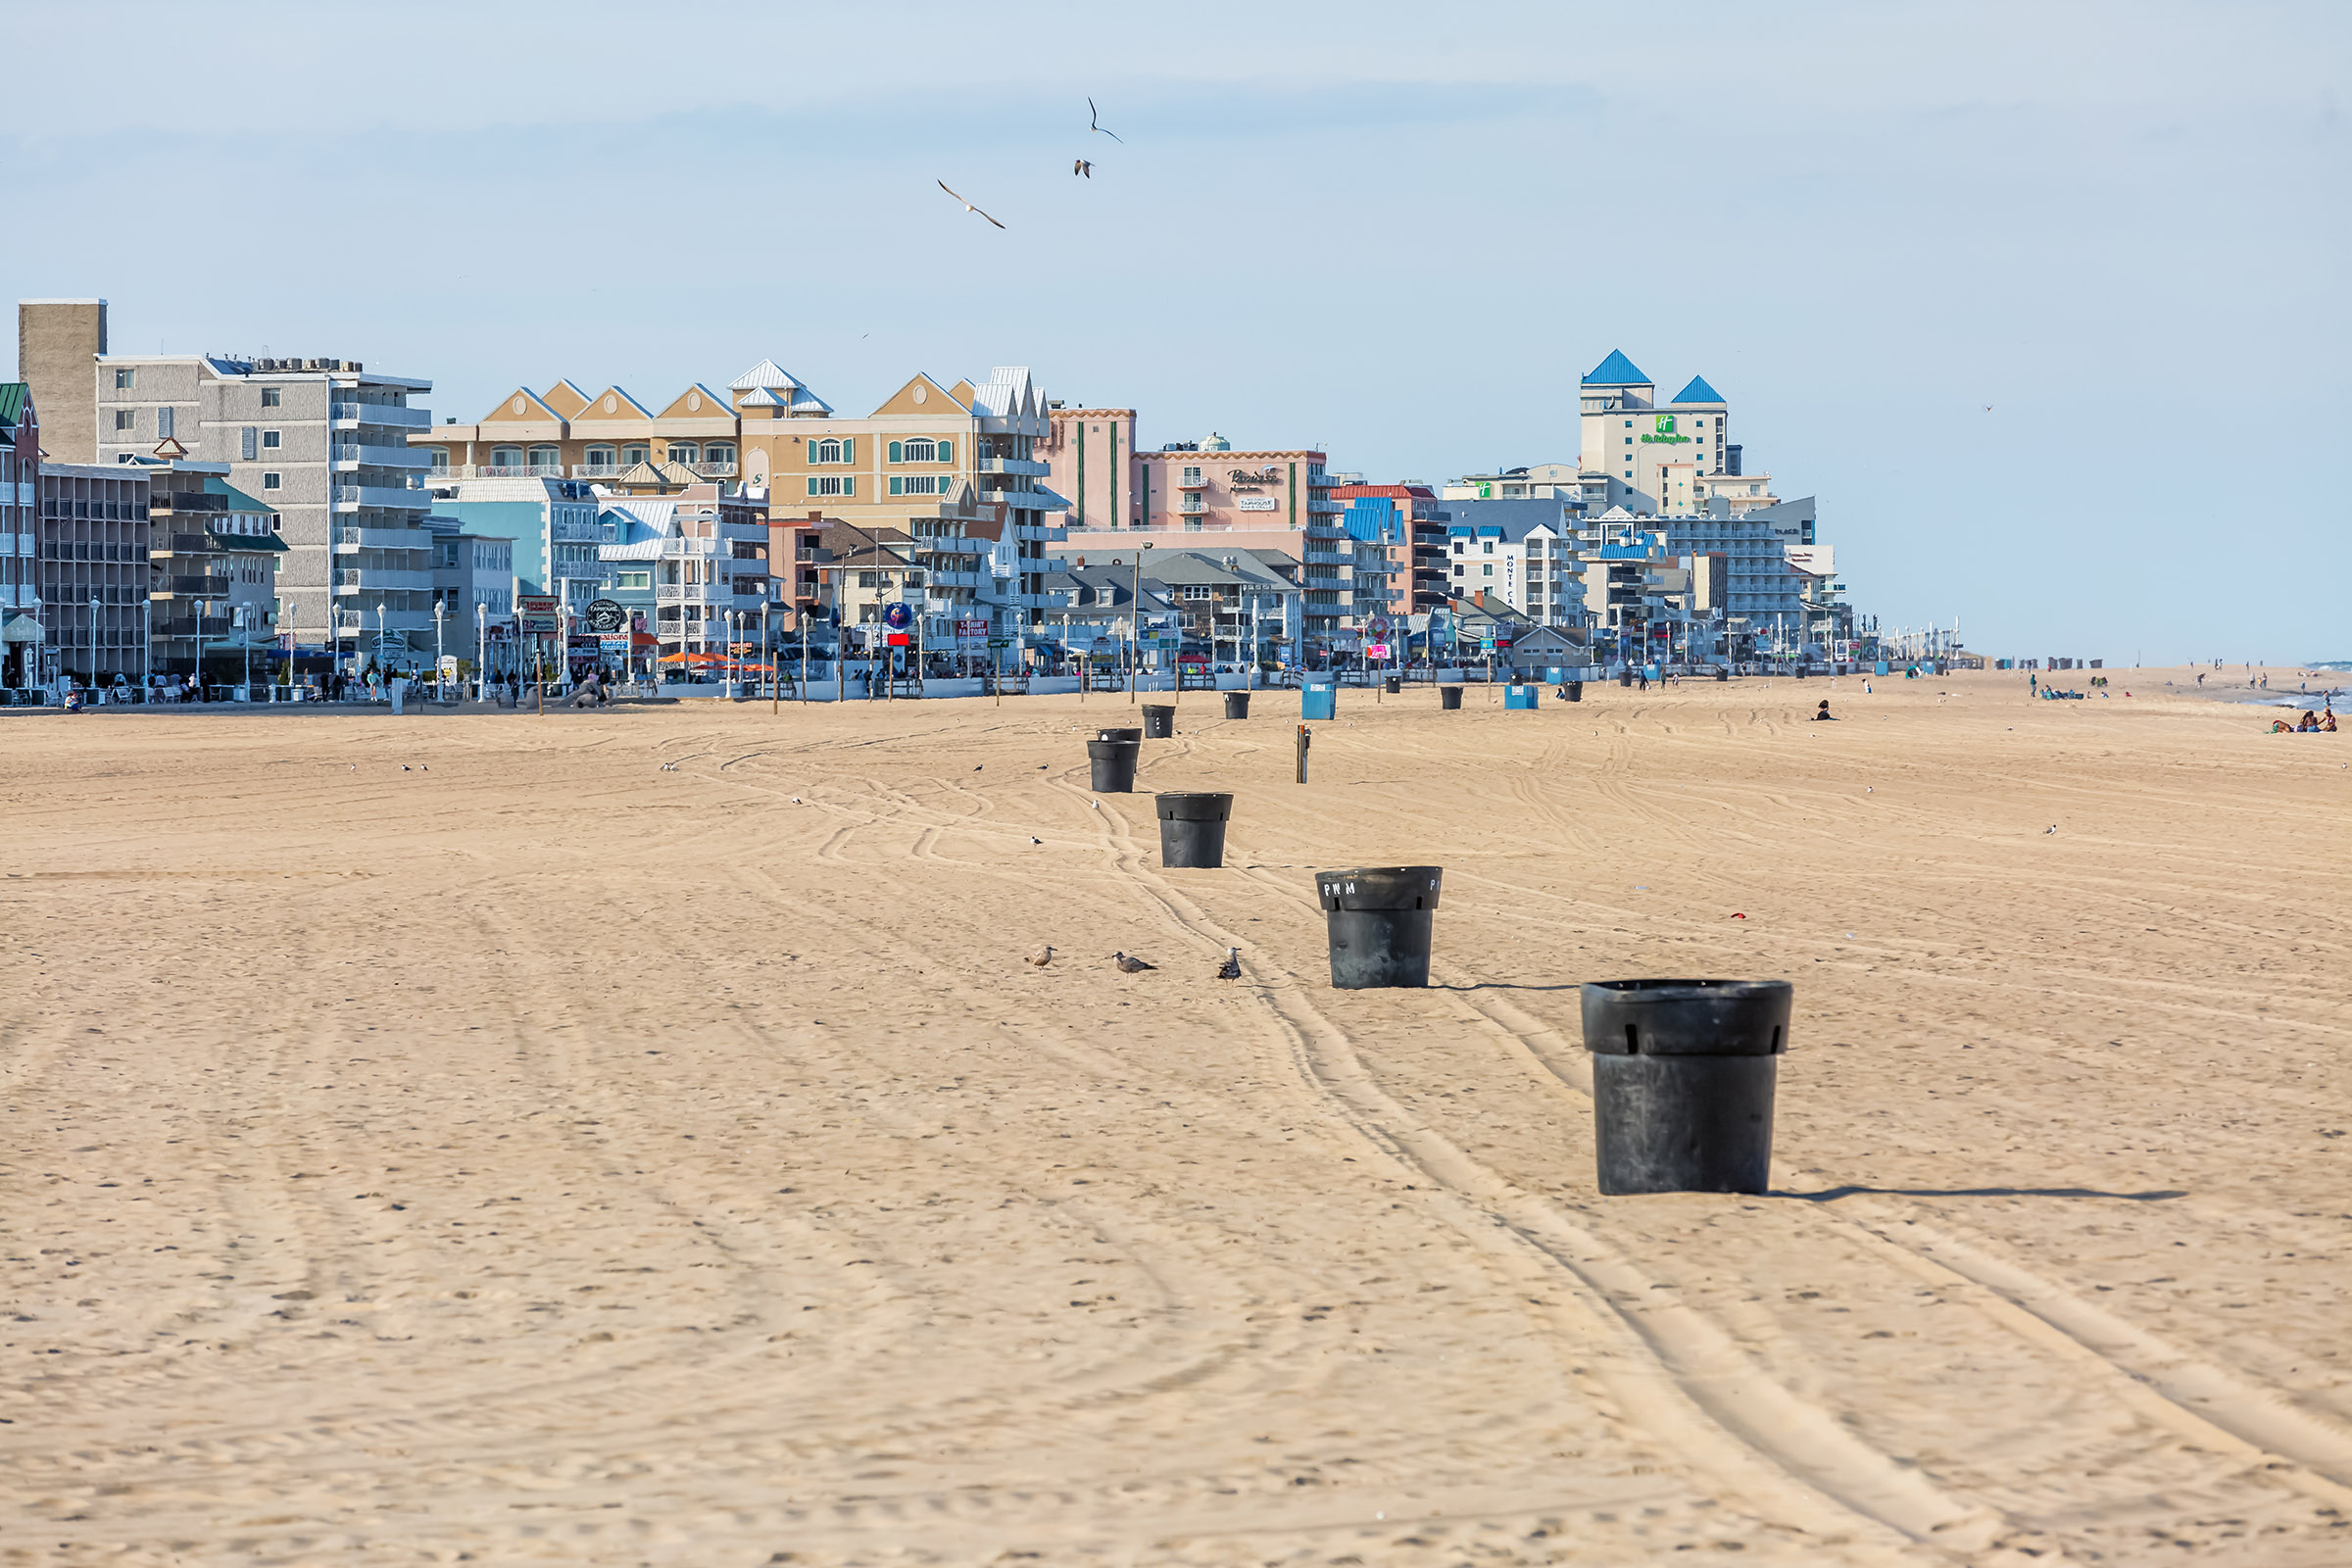 Off-season beach trash barrels are unlikely to occur